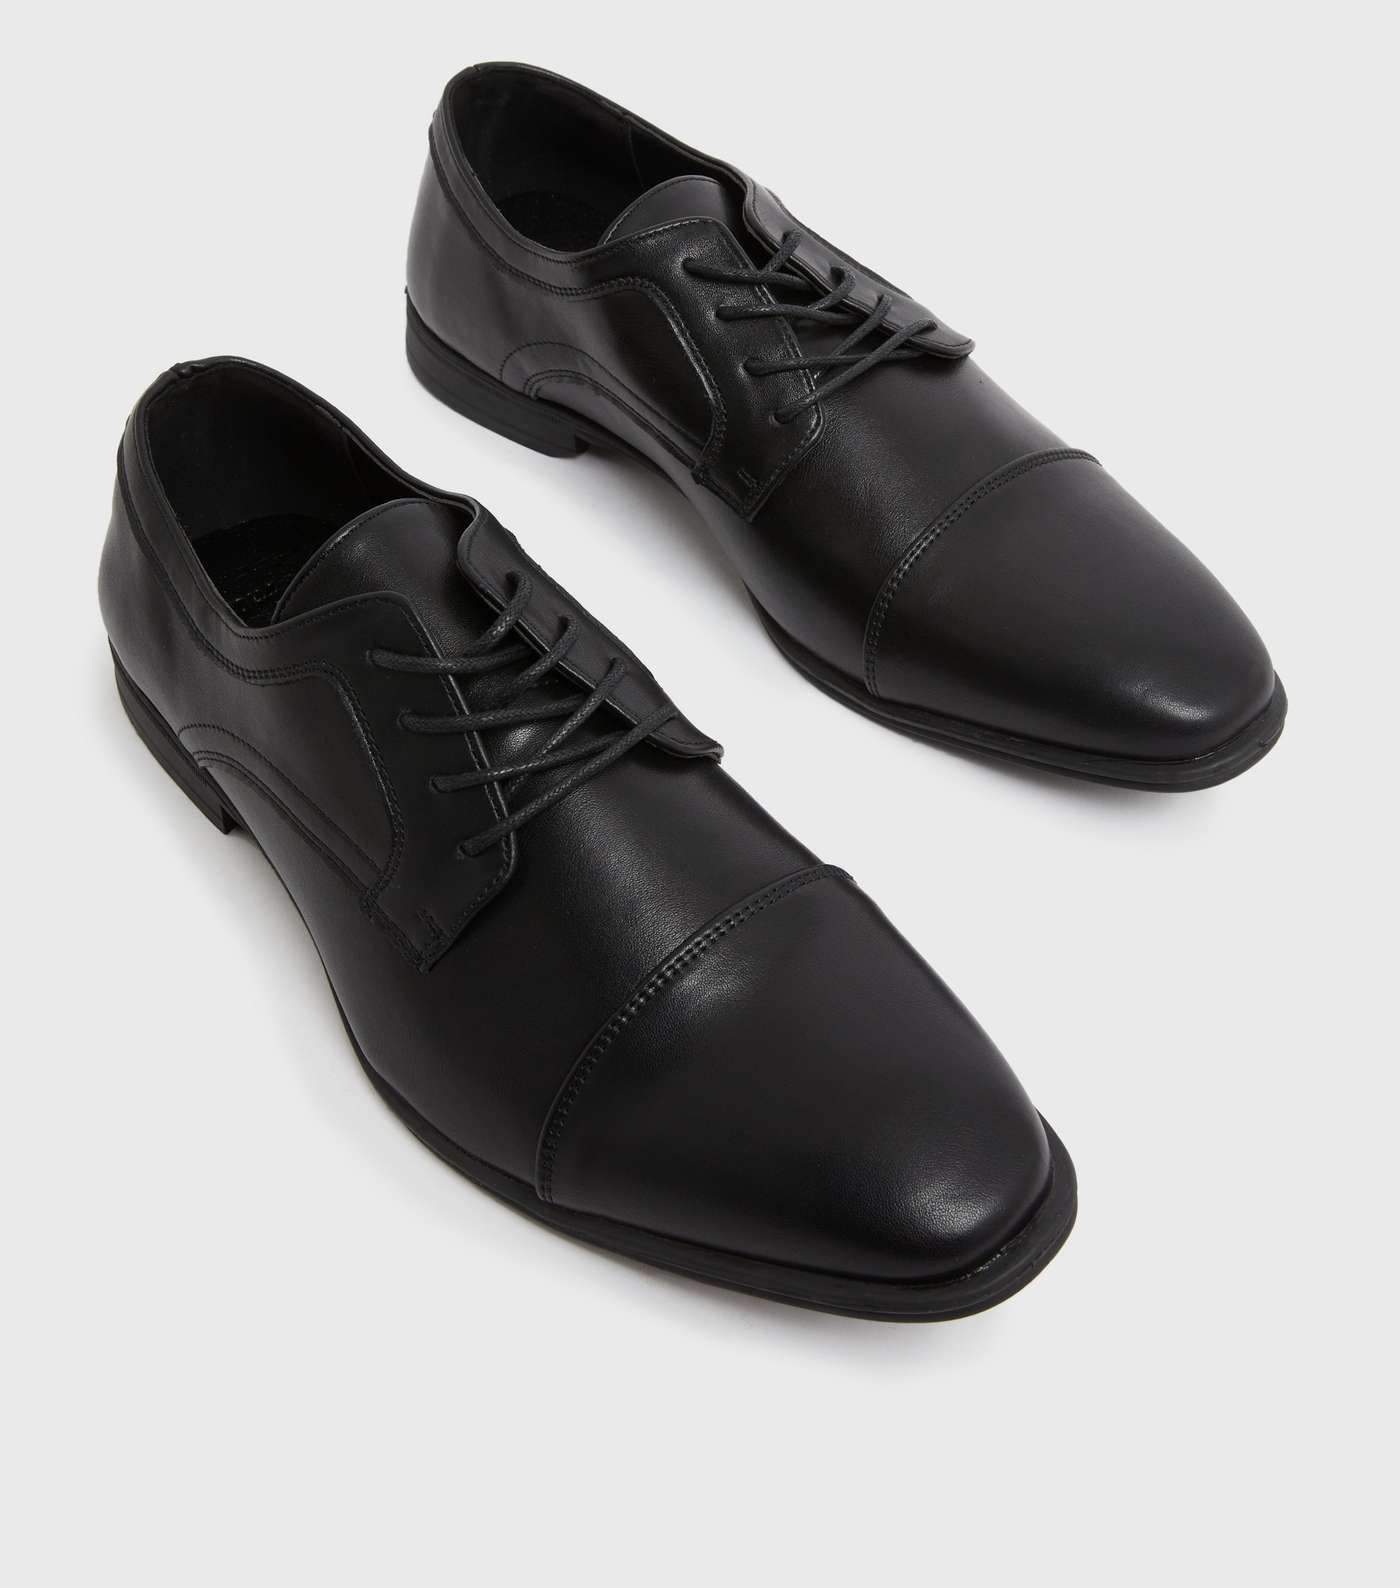 Black Leather-Look Oxford Shoes Image 3